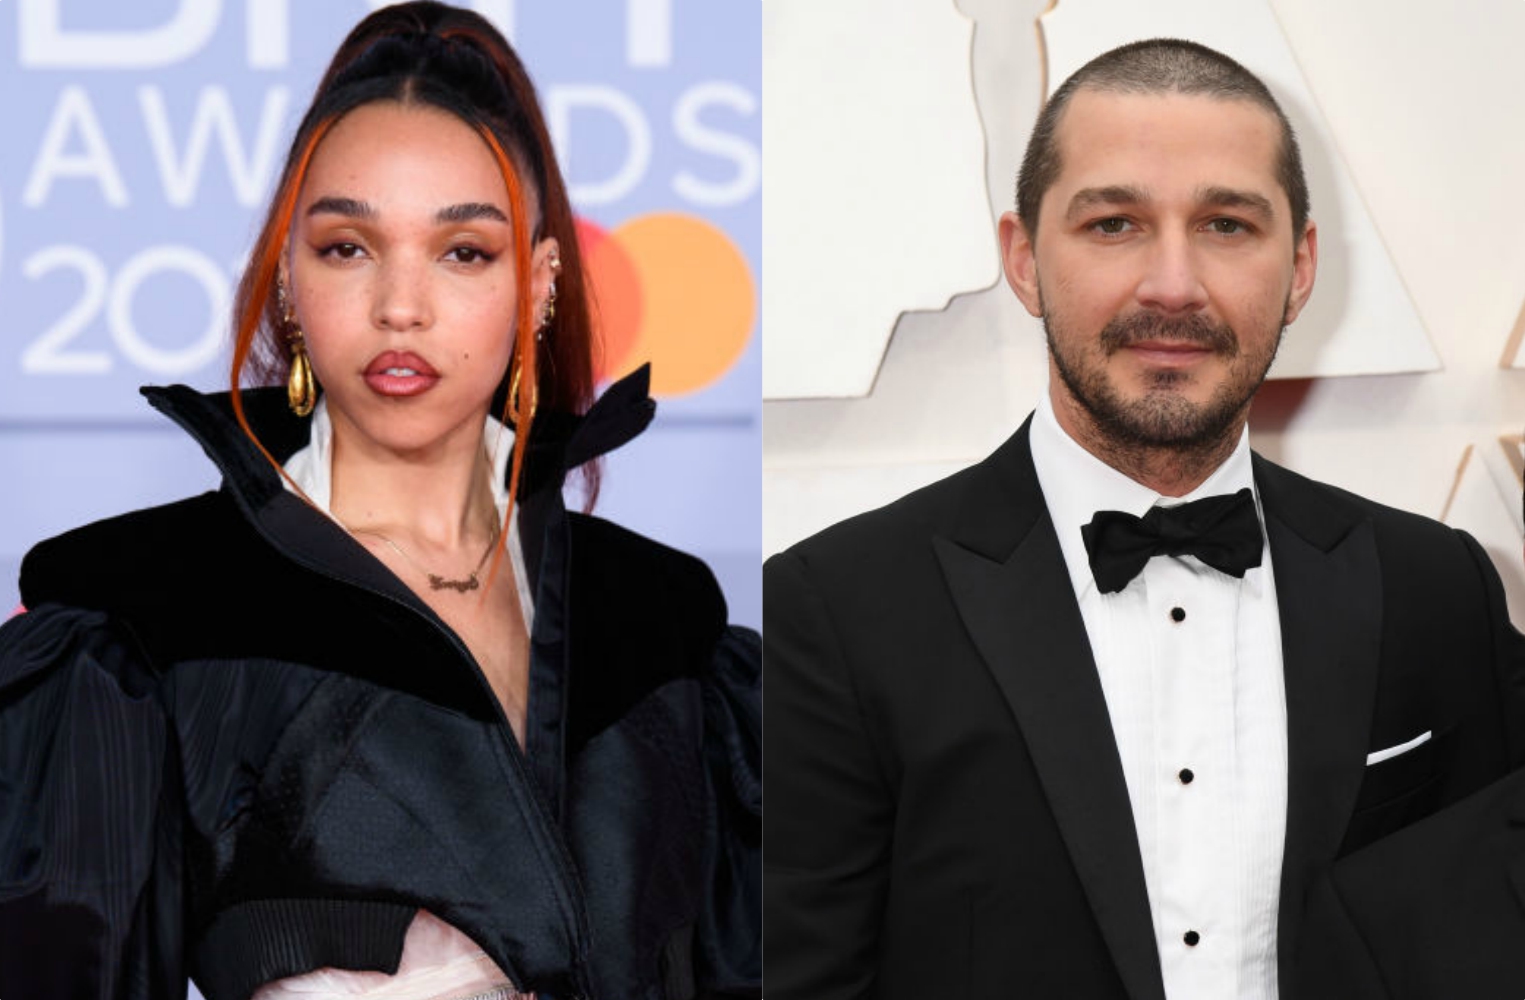 Shia LaBeouf Responds as FKA twigs Accuses Him of Abuse 